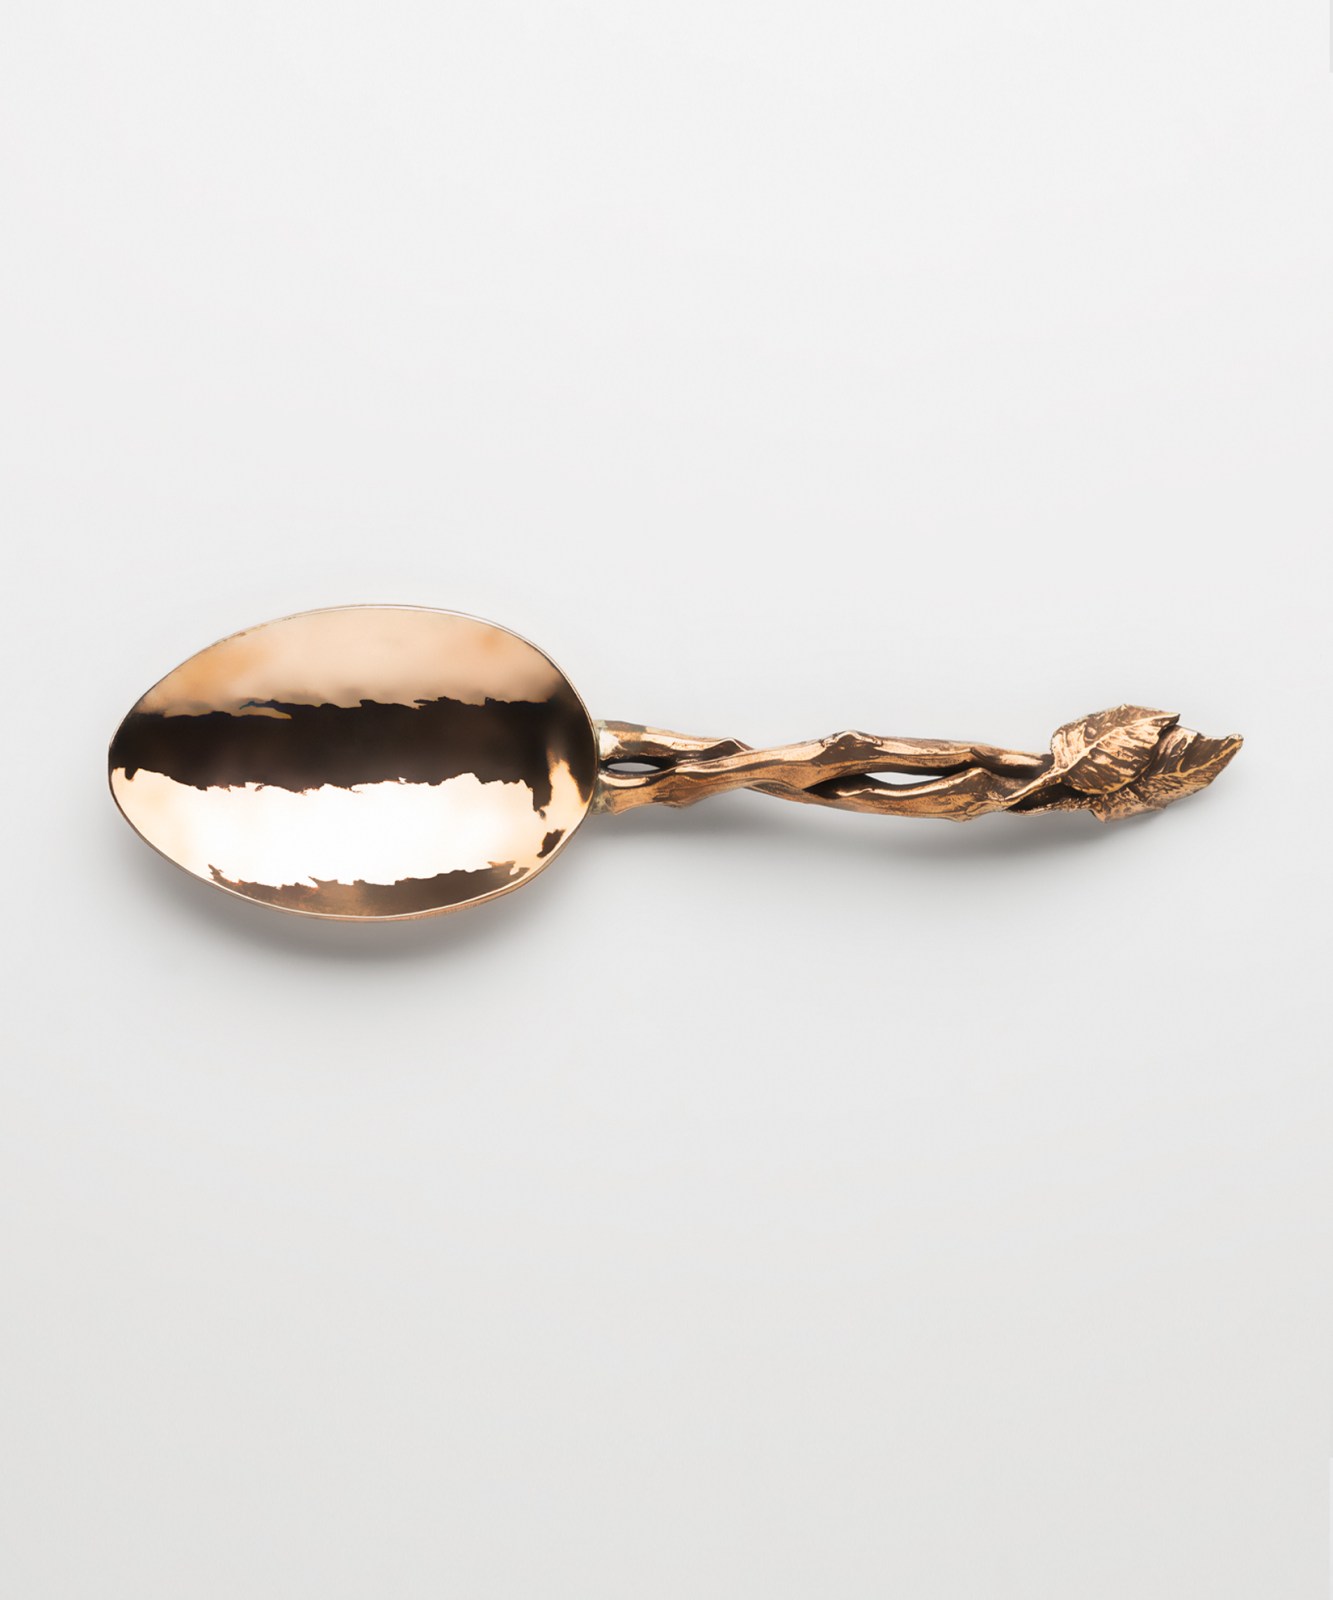 Rose Branch Risotto Serving Spoon in Bronze - Style 1472